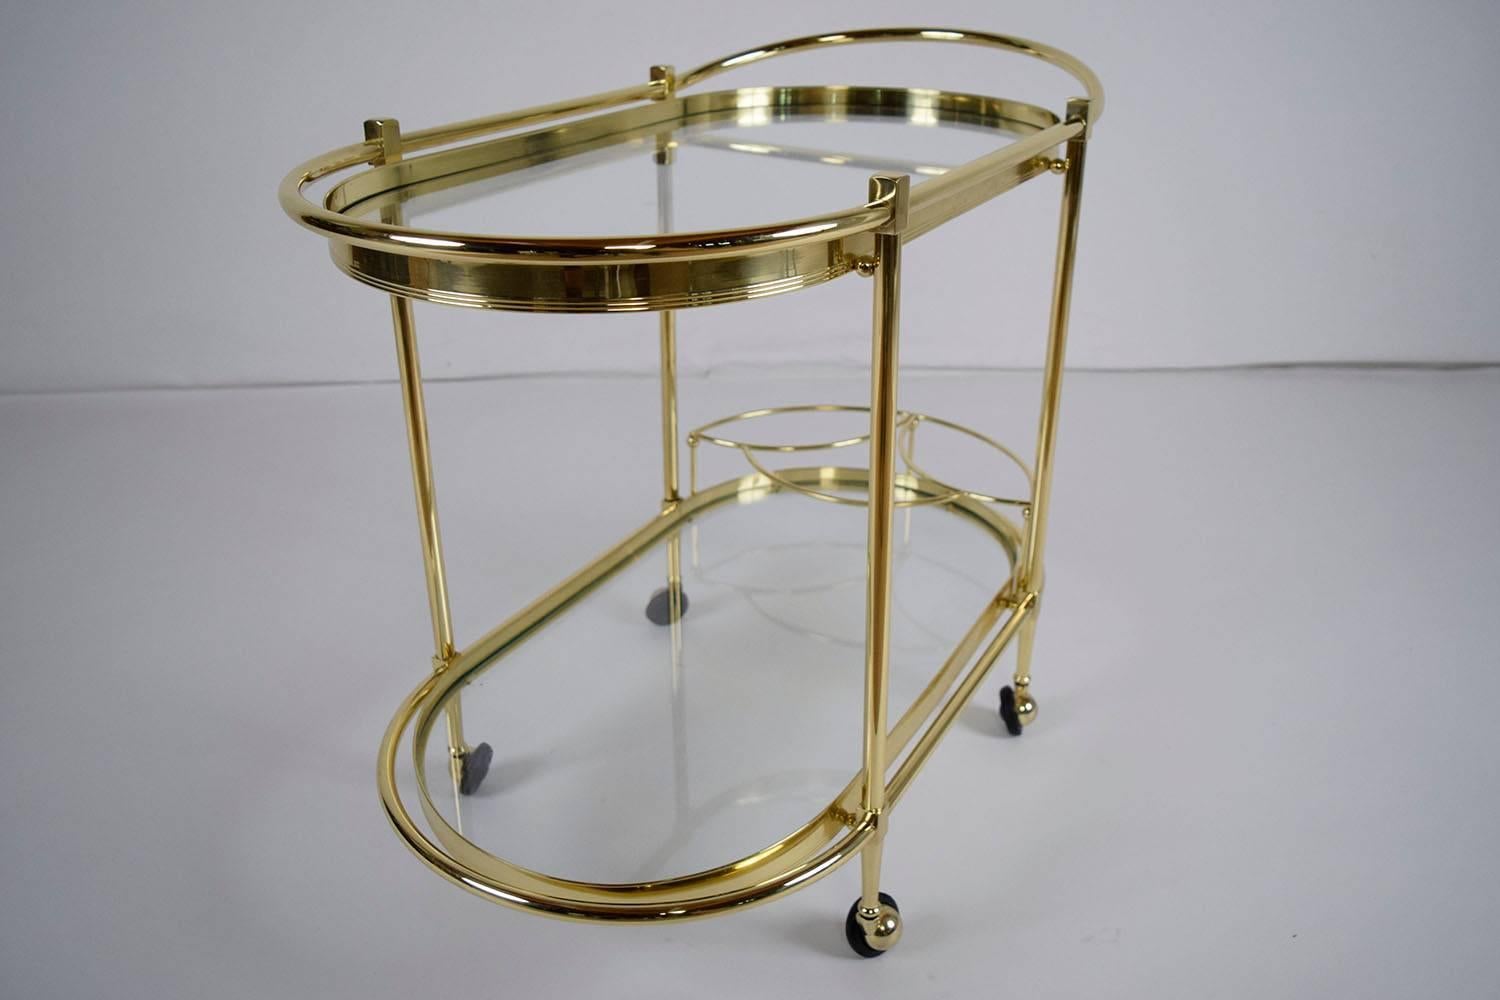 This 1980s vintage Italian Regency style oval tea cart features a brass frame. The brass frame features two levels. The top level features a glass shelf with a bar around the top with a handle to push the cart. The bottom shelf features a glass